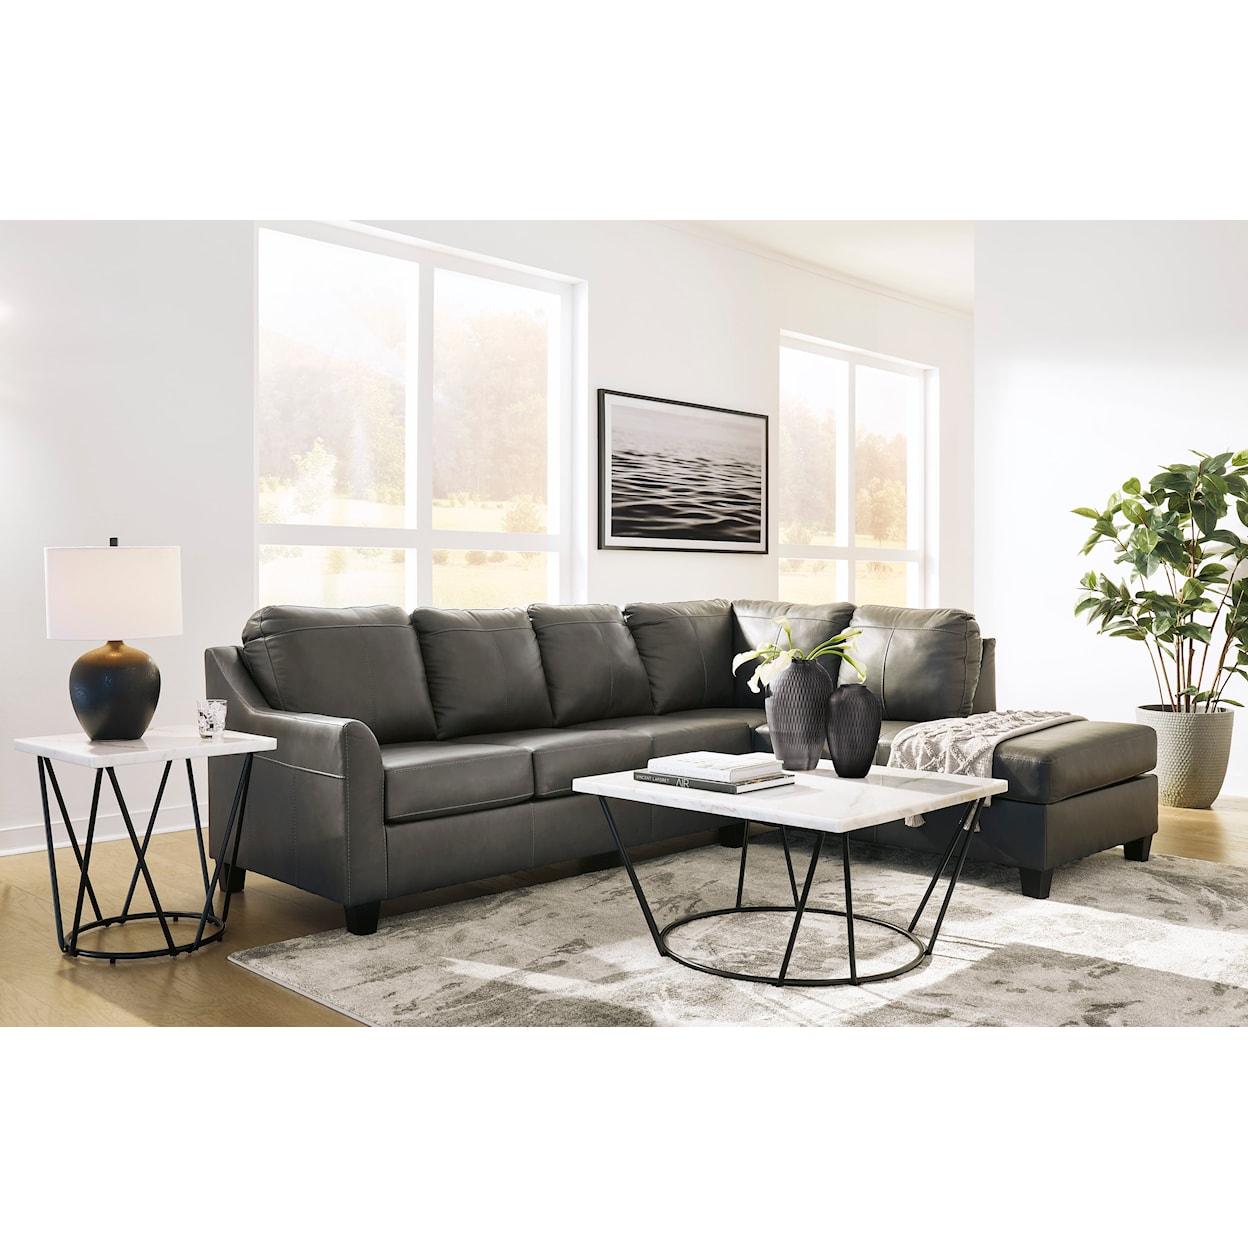 Benchcraft Valderno 2-Piece Sectional with Chaise